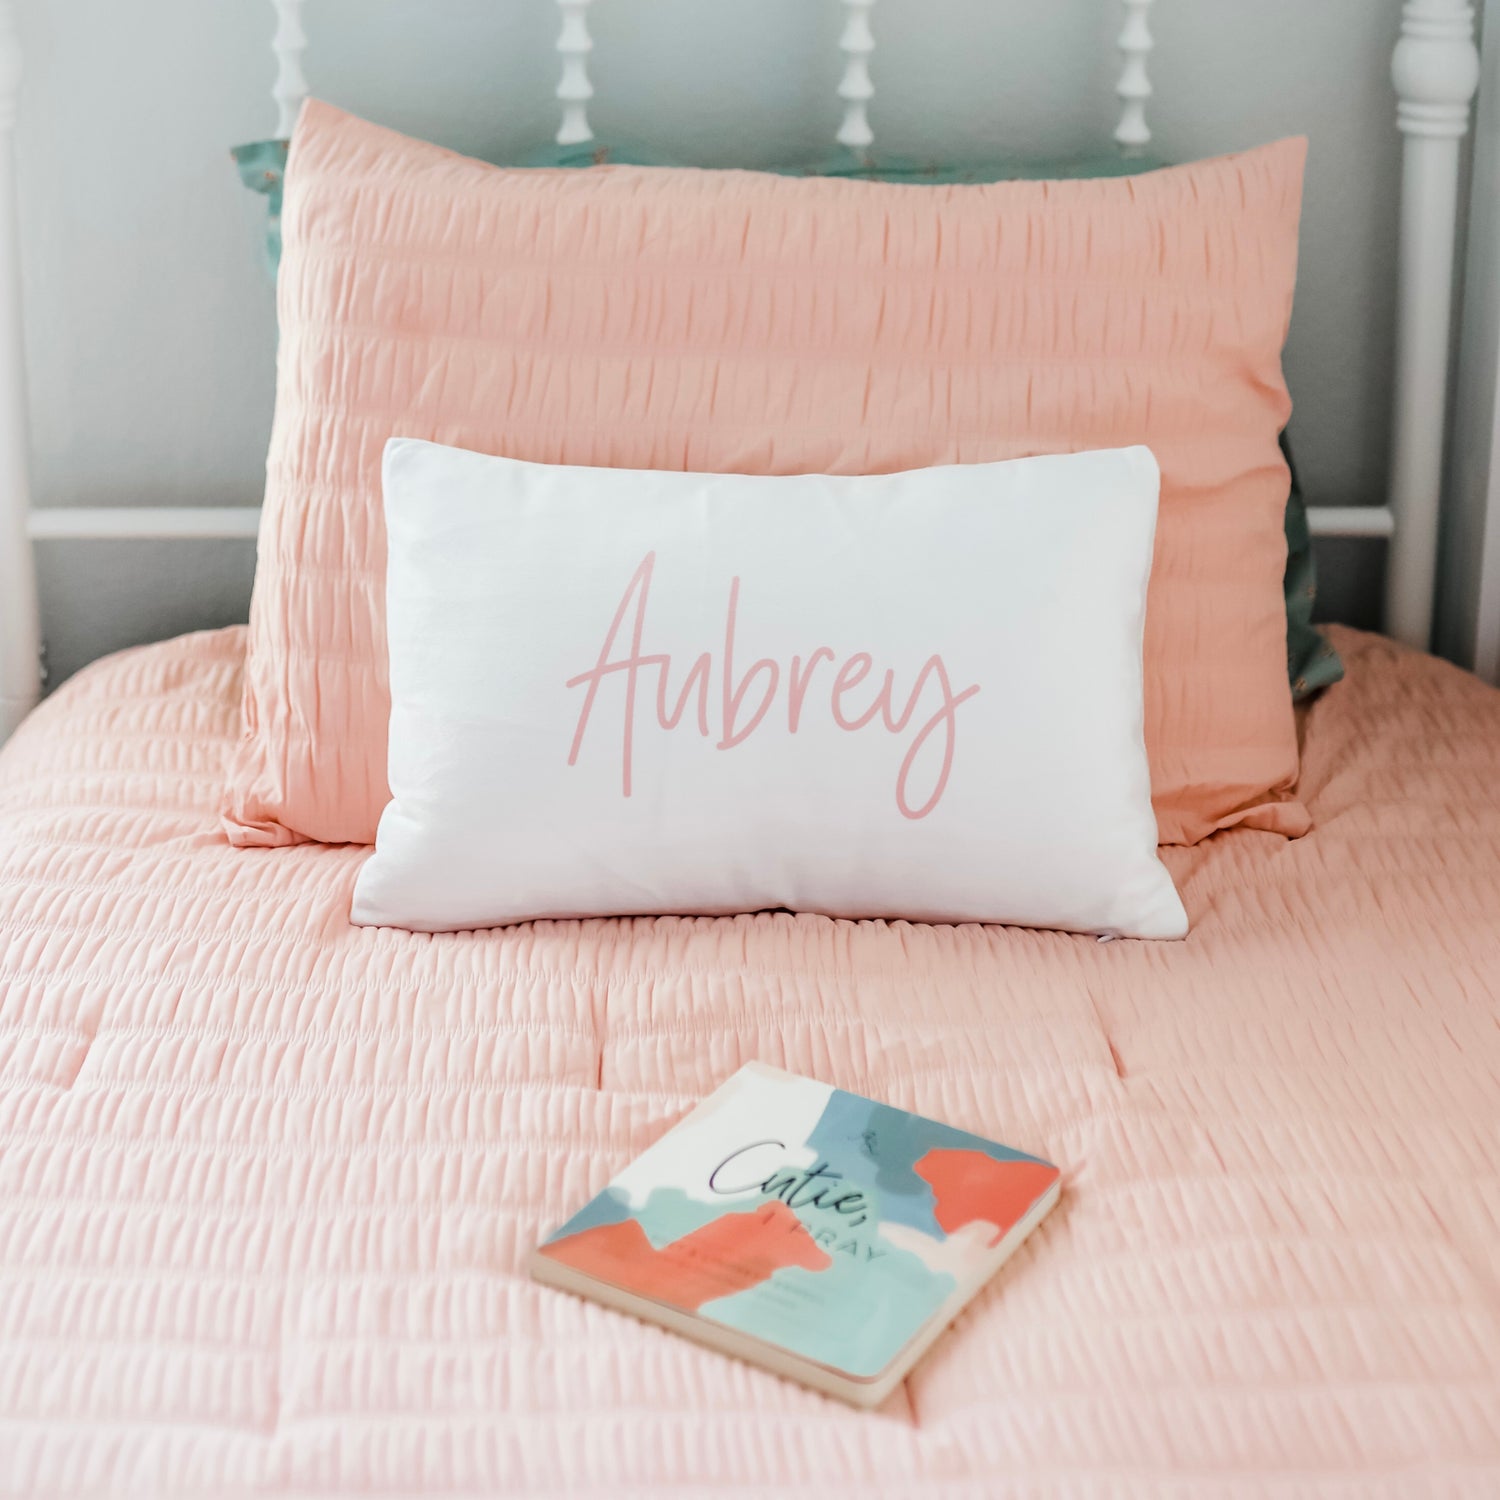 Cutie pillow with a book on a bed